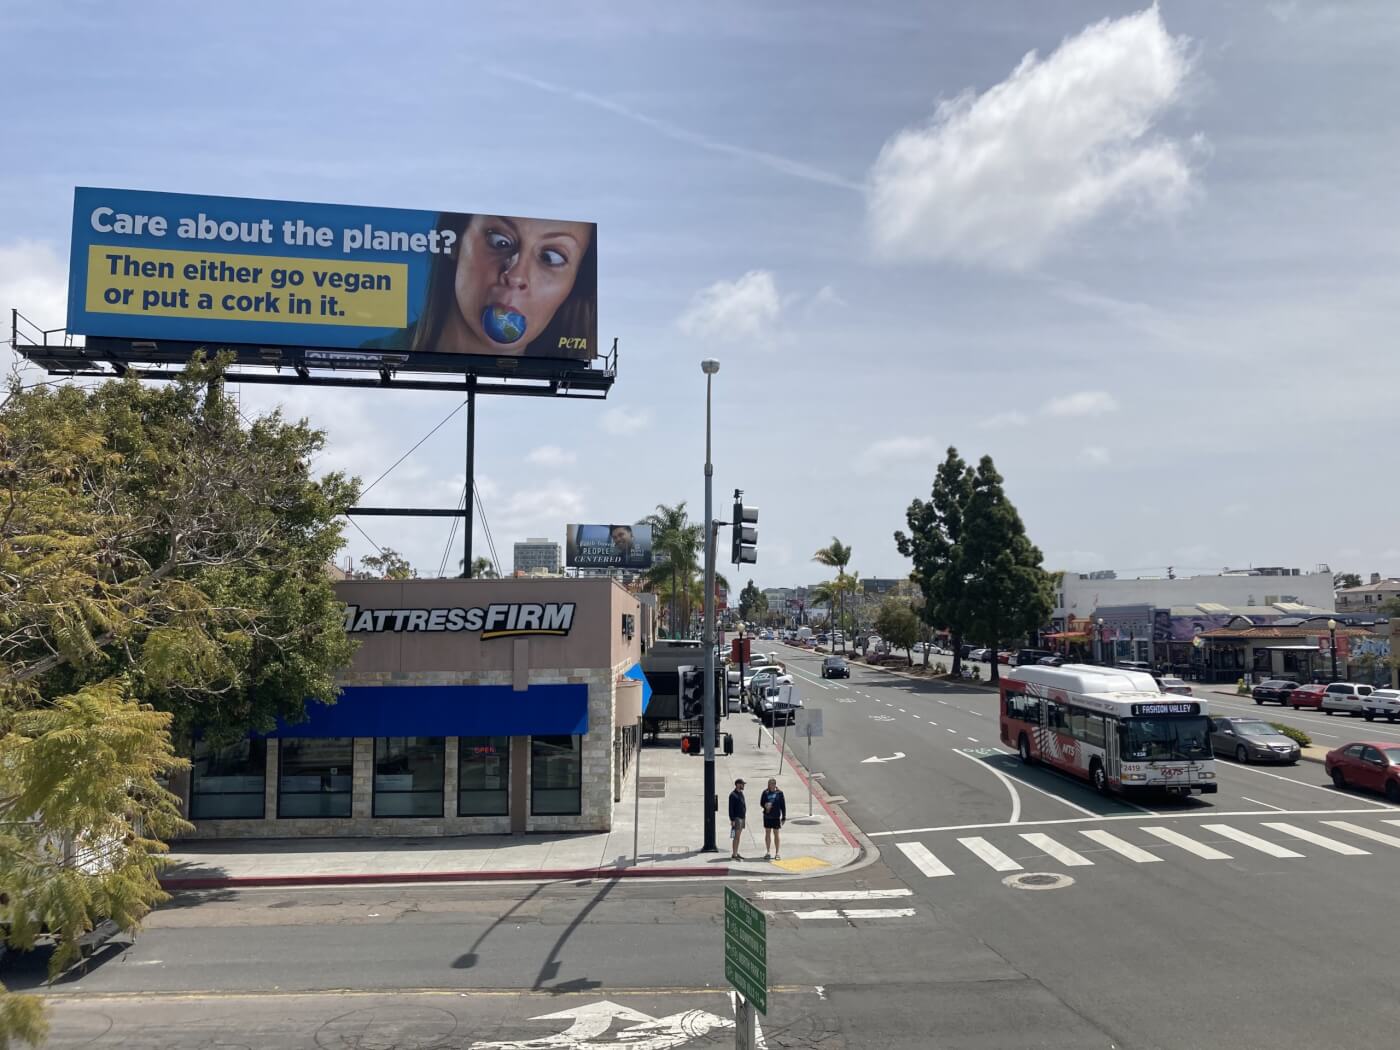 PETA's 2023 Earth Day ad on a billboard above an intersection in San Diego, California